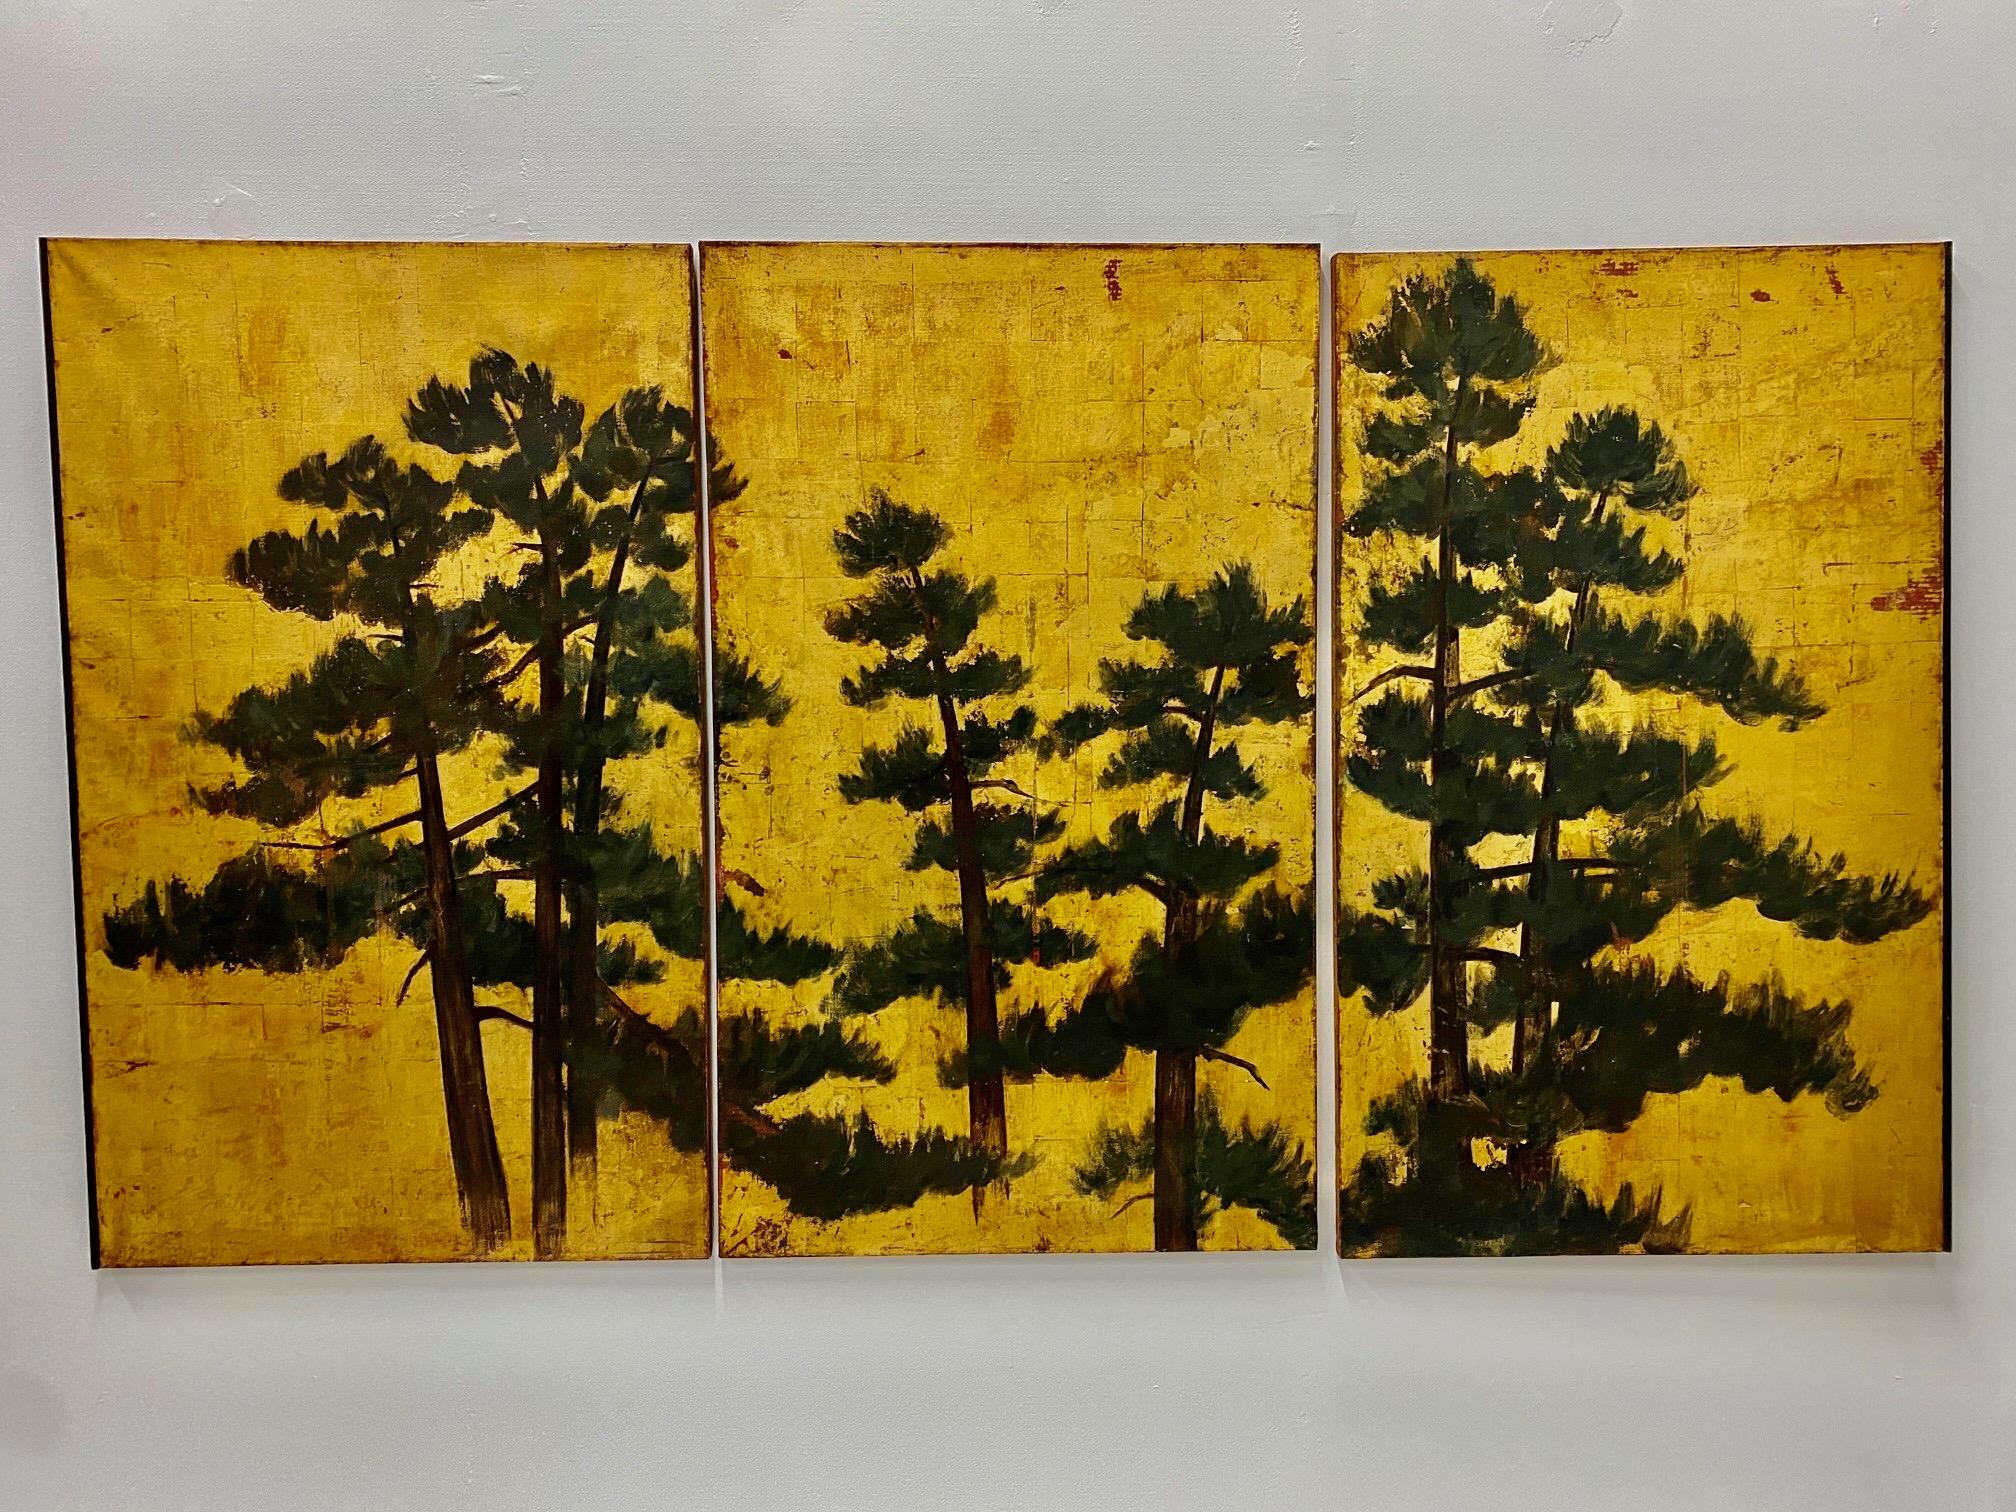 Exceptional 19th century 3 part oil painting or triptych depicting pine trees on a gold leafed background. The patina has subtle visiible squares of gold leaf with hints of red underpaint. The deep green of the trees against gold contrast